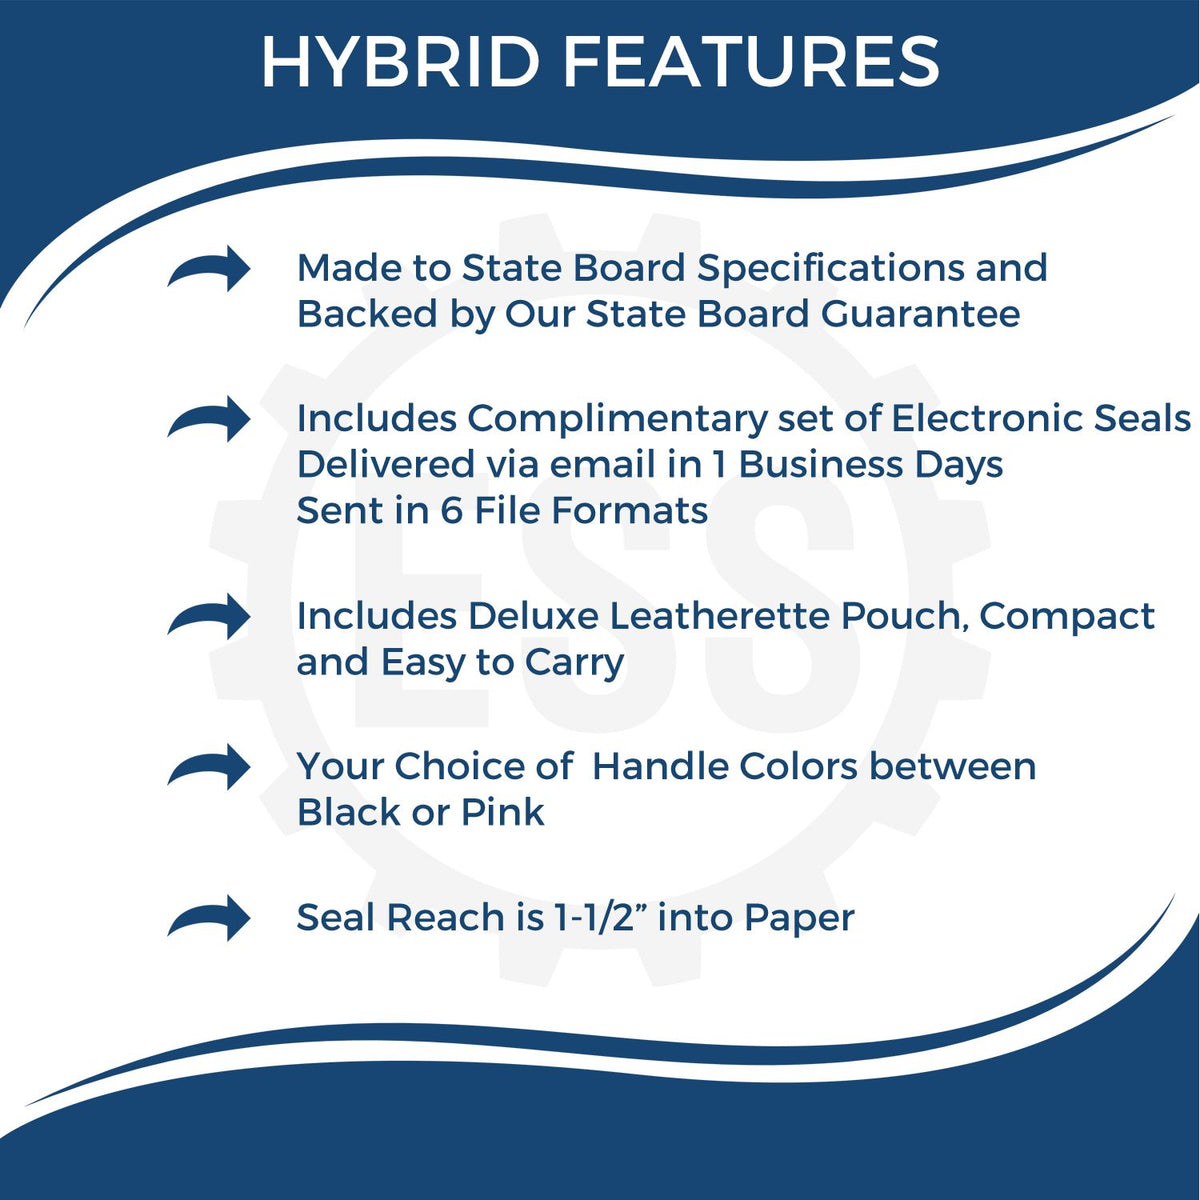 A picture of an infographic highlighting the selling points for the Hybrid Rhode Island Landscape Architect Seal